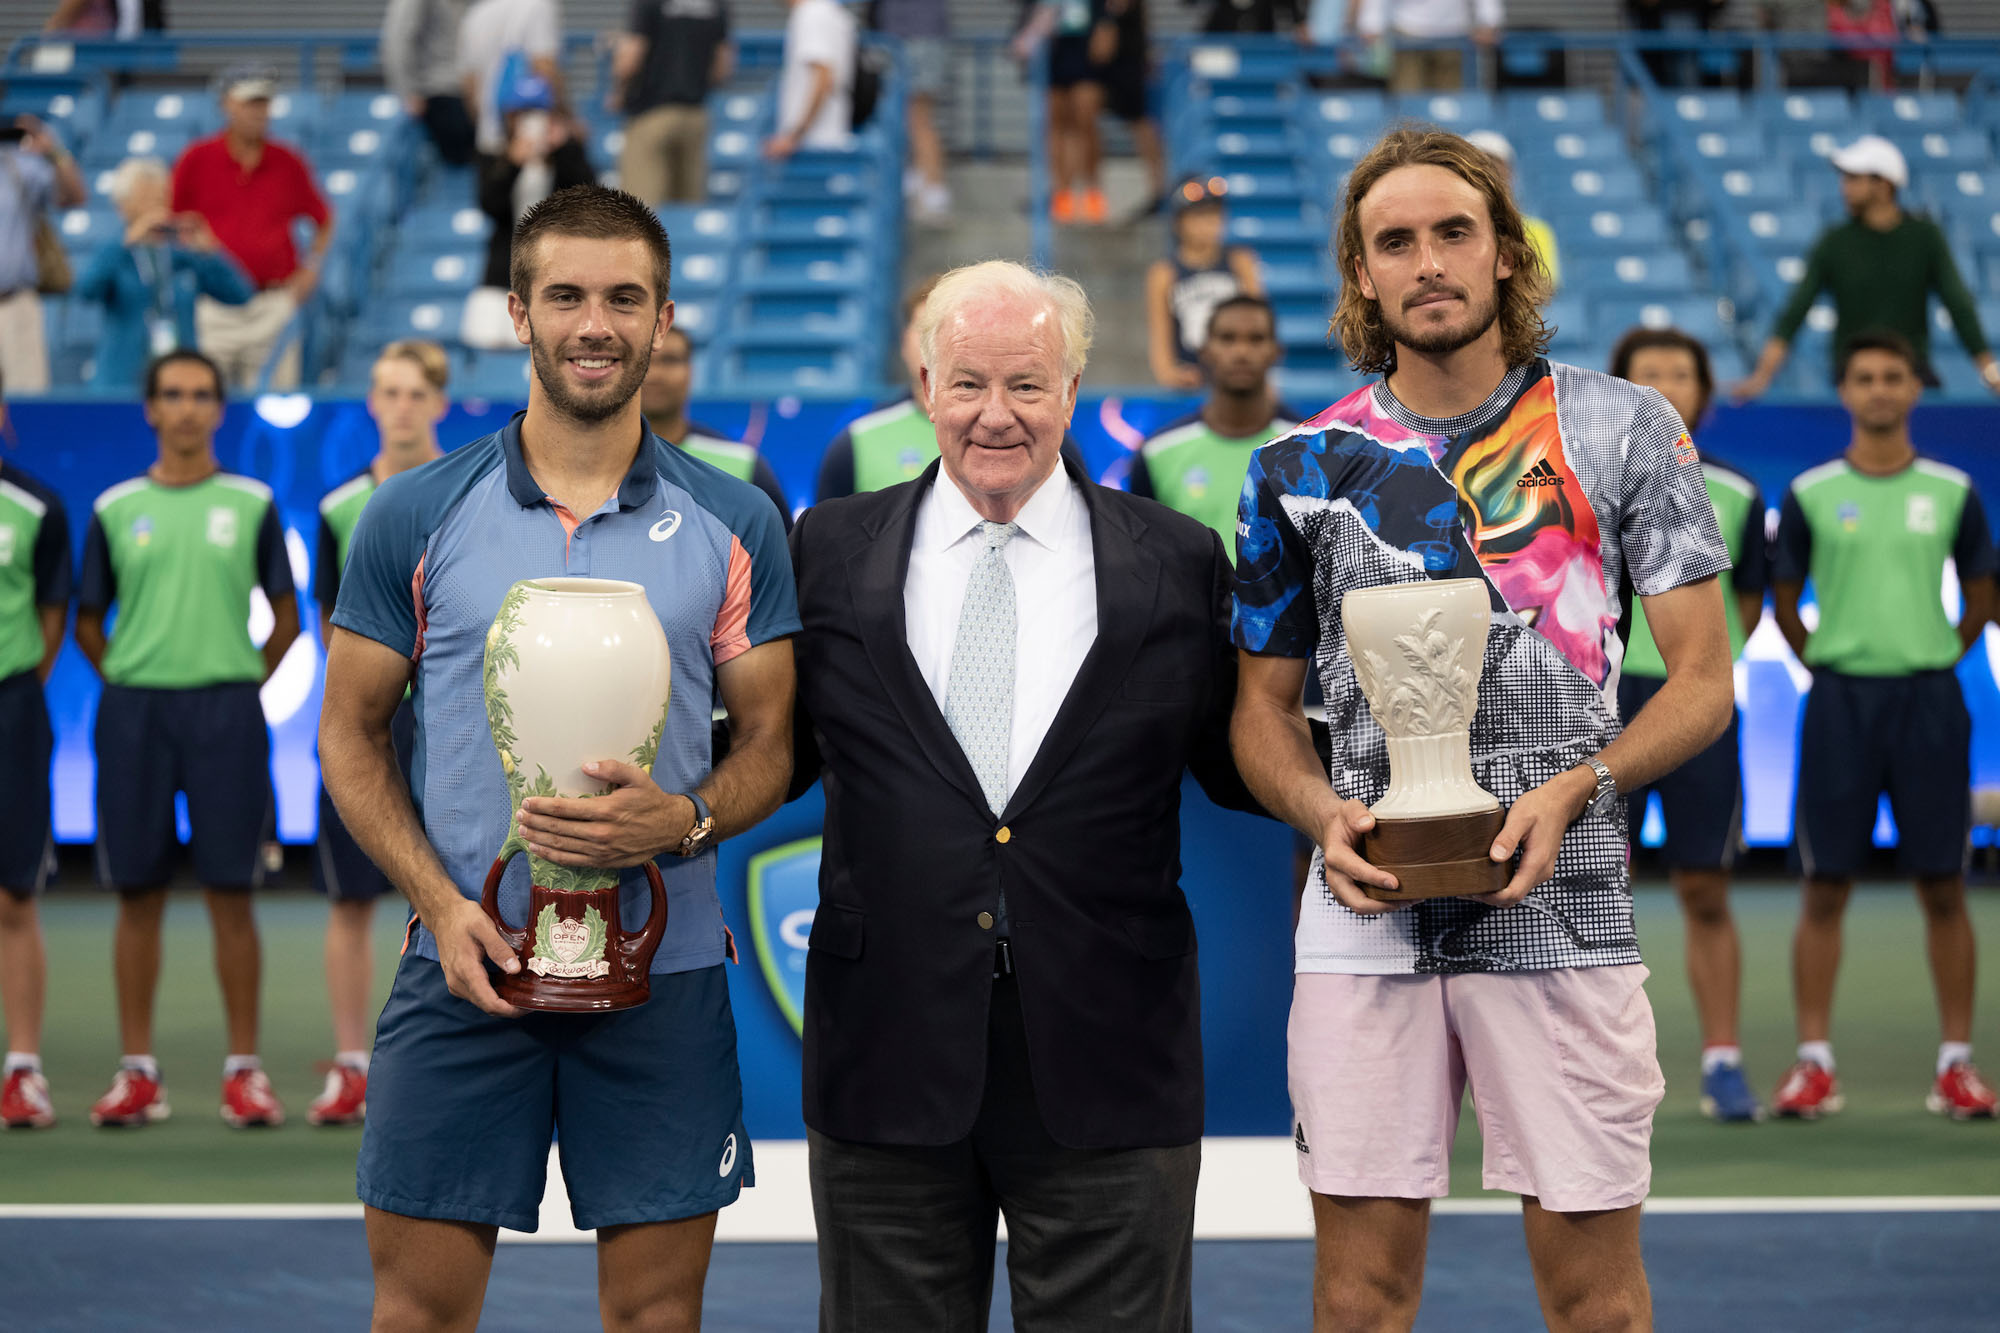 players with trophies on court